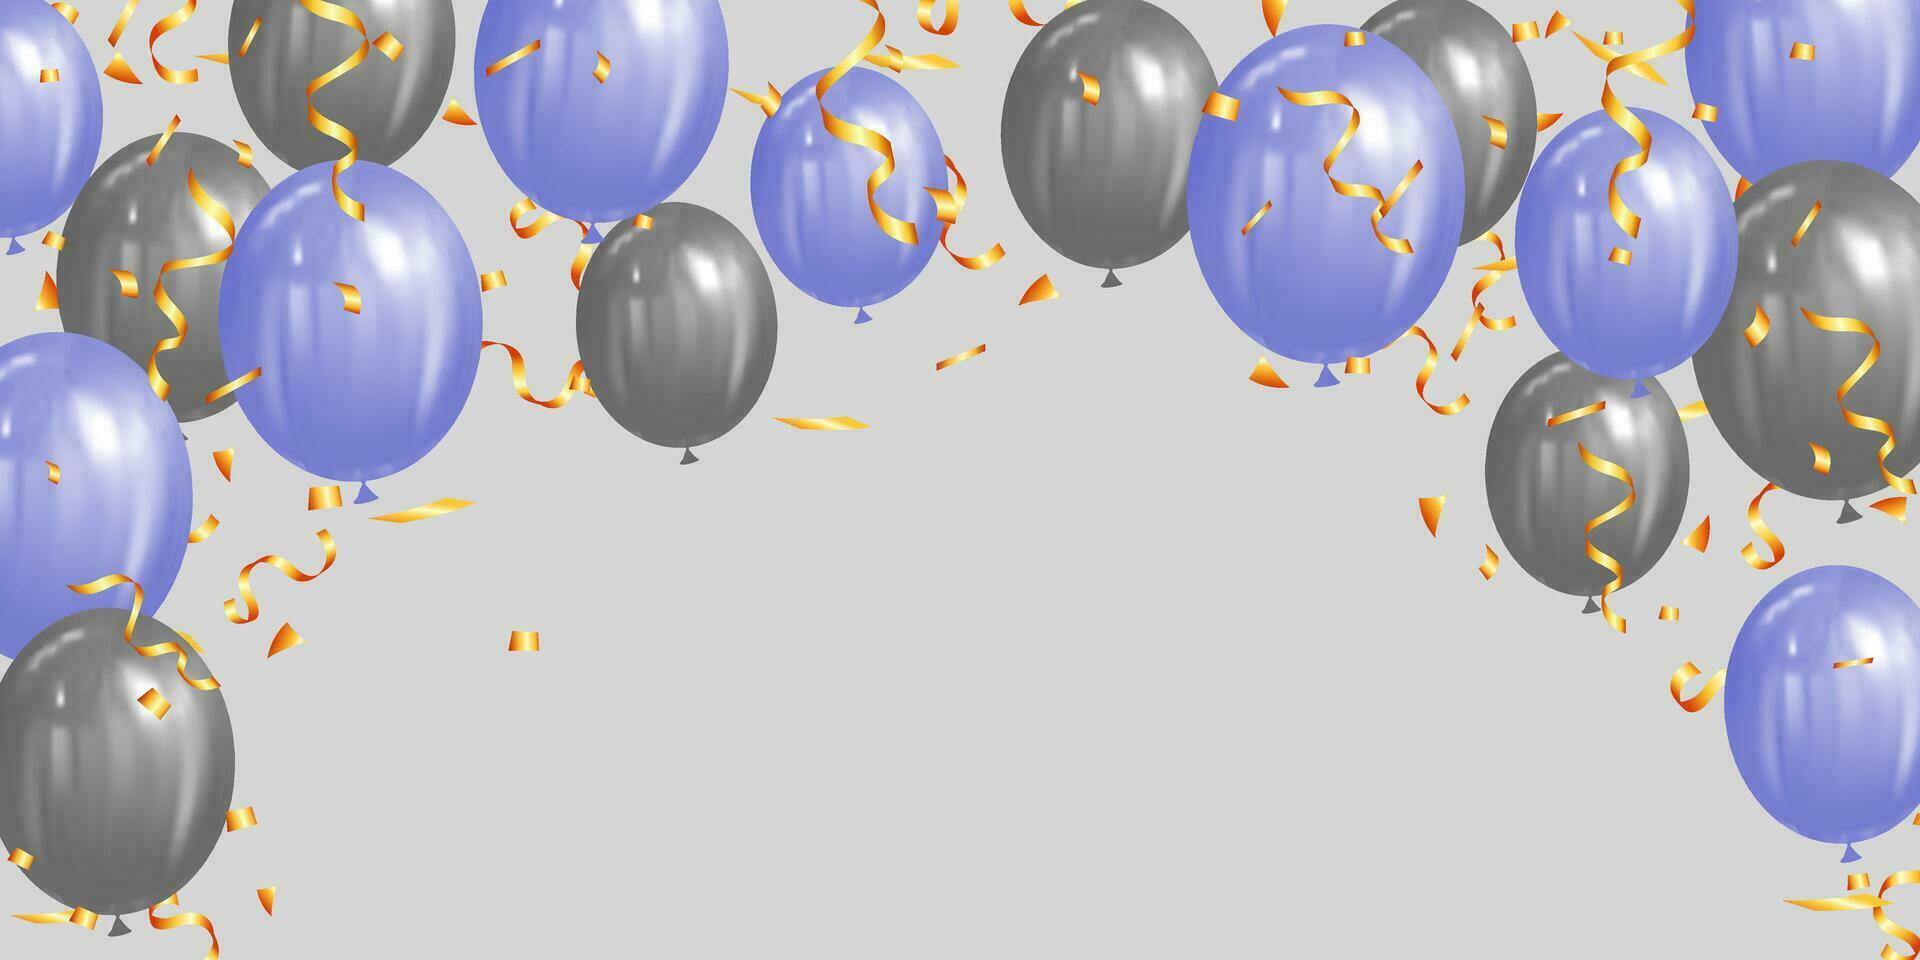 Vector illustration of purple and silver balloons with ribbons and confetti on grey background